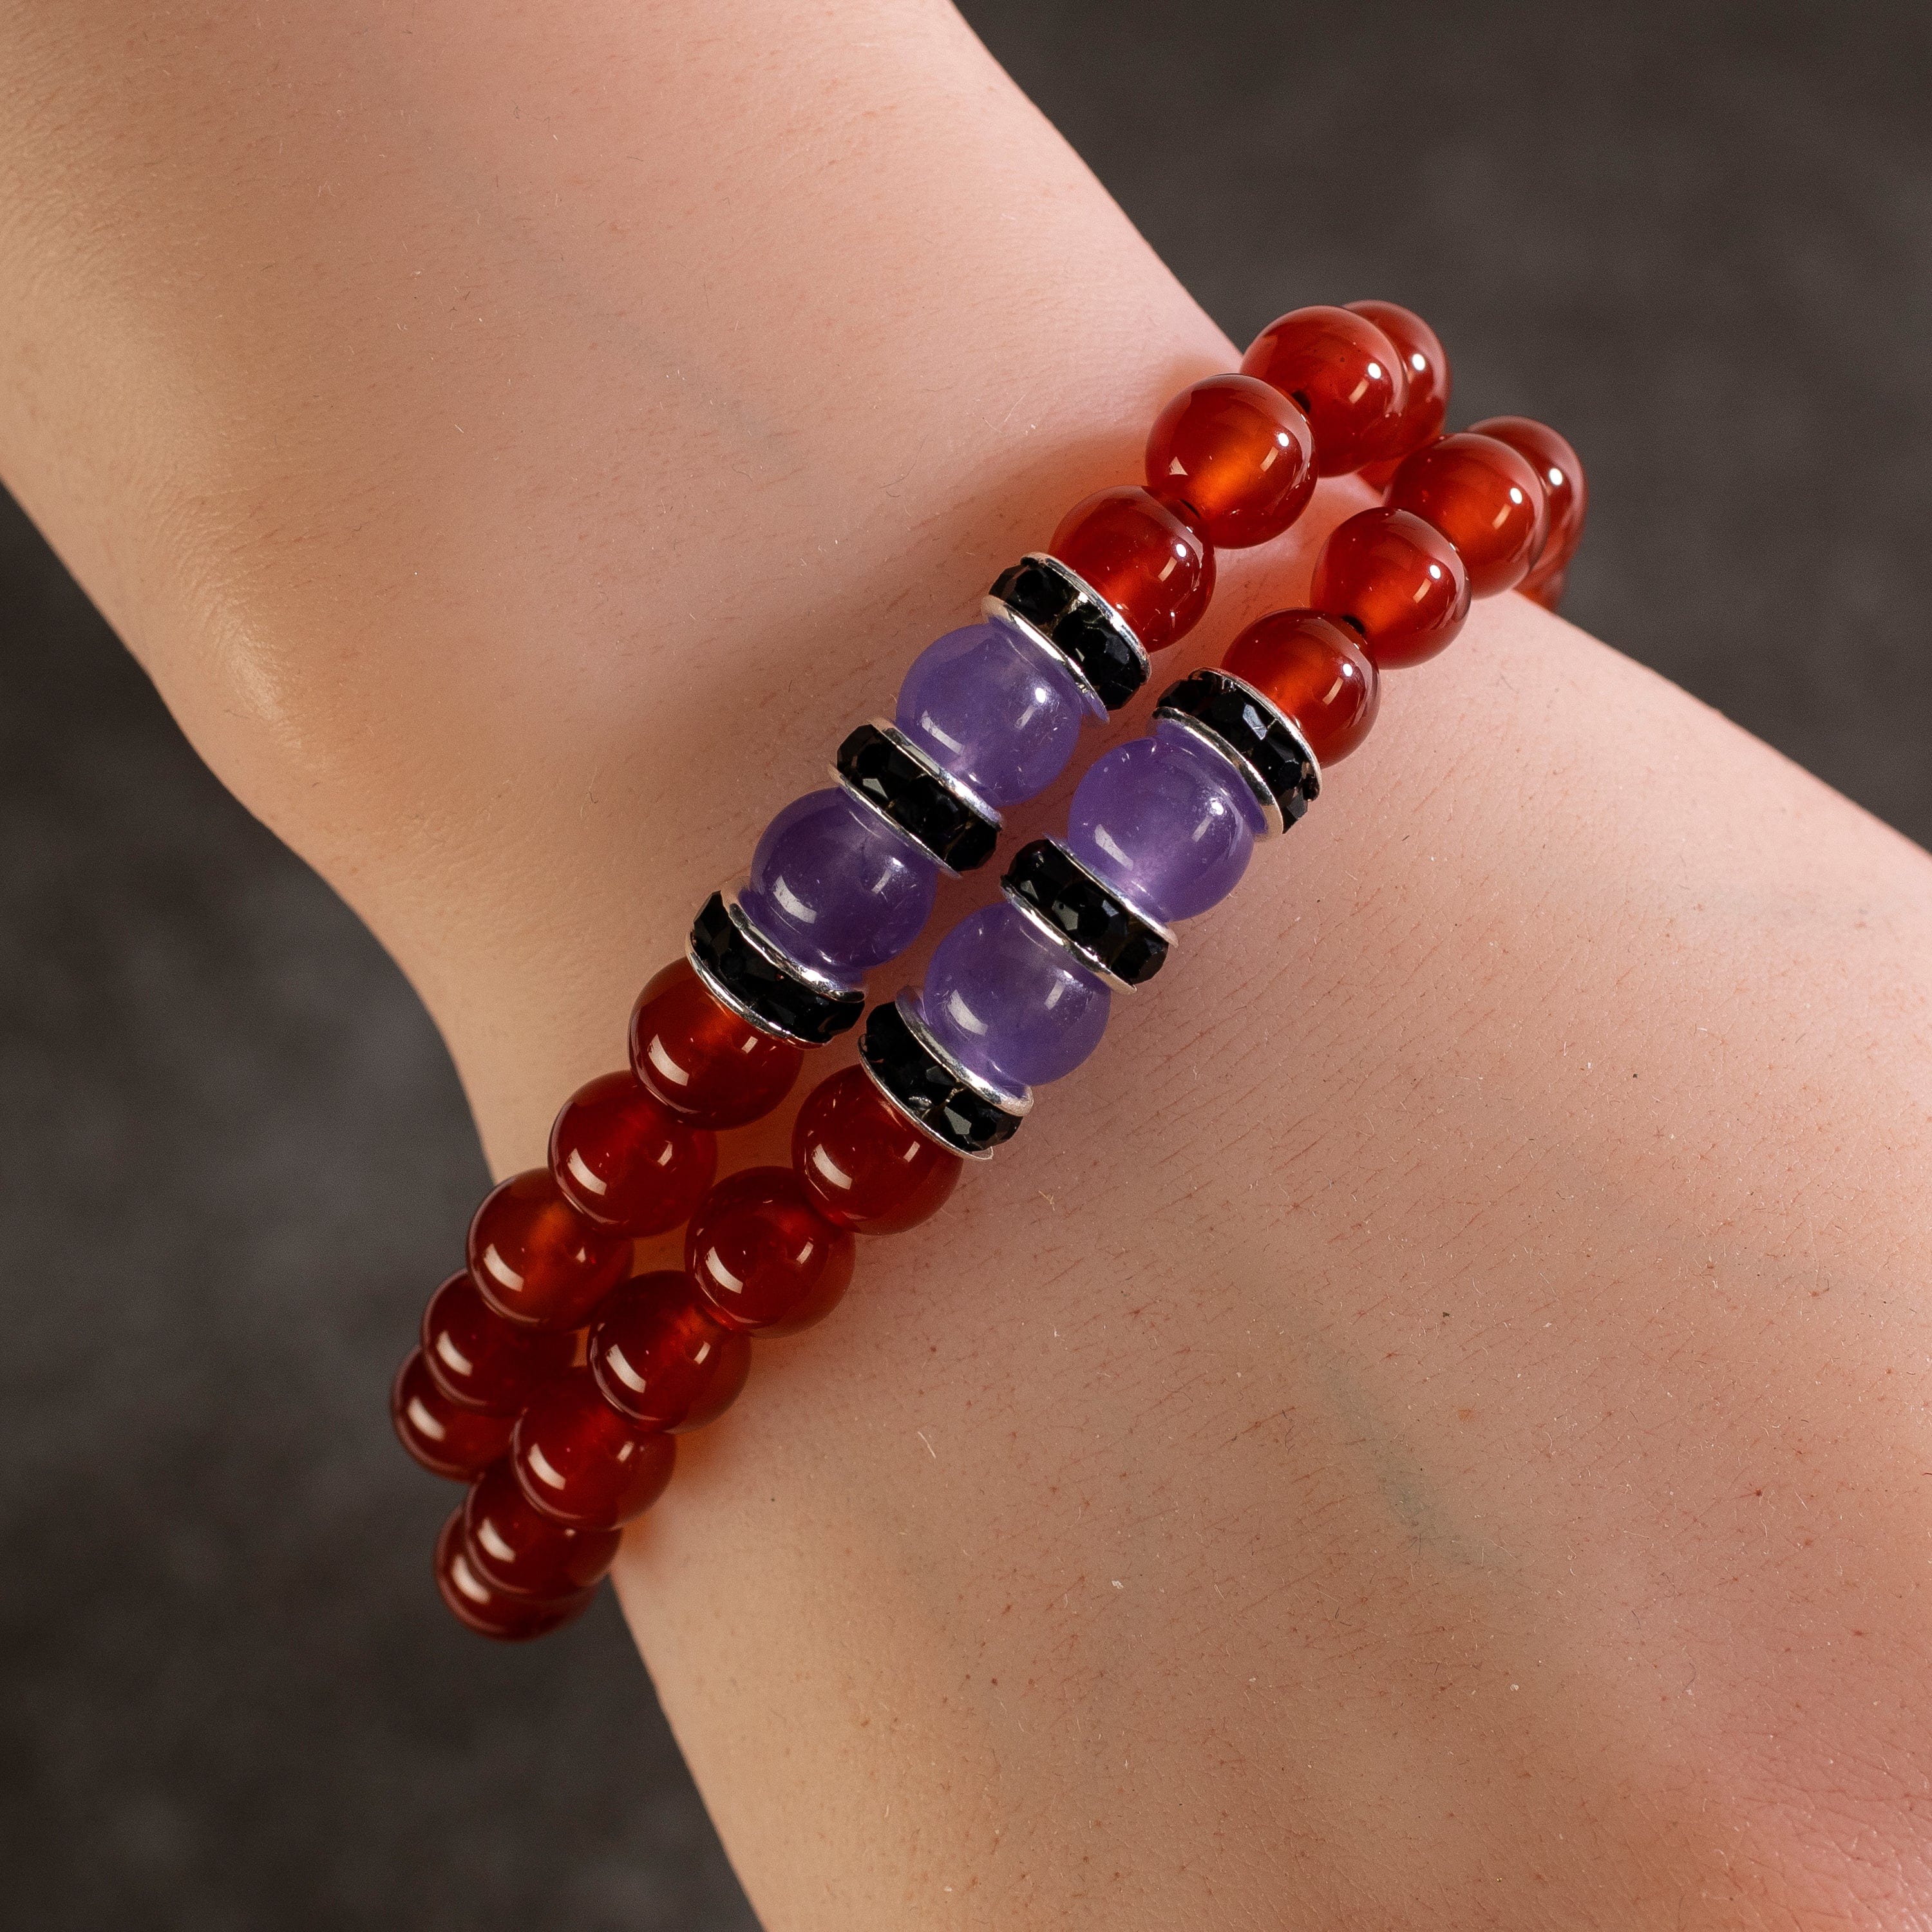 Kalifano Gemstone Bracelets Carnelian 8mm Beads with Purple Agate and Black and Silver Accent Beads Double Wrap Elastic Gemstone Bracelet WHITE-BGI2-040